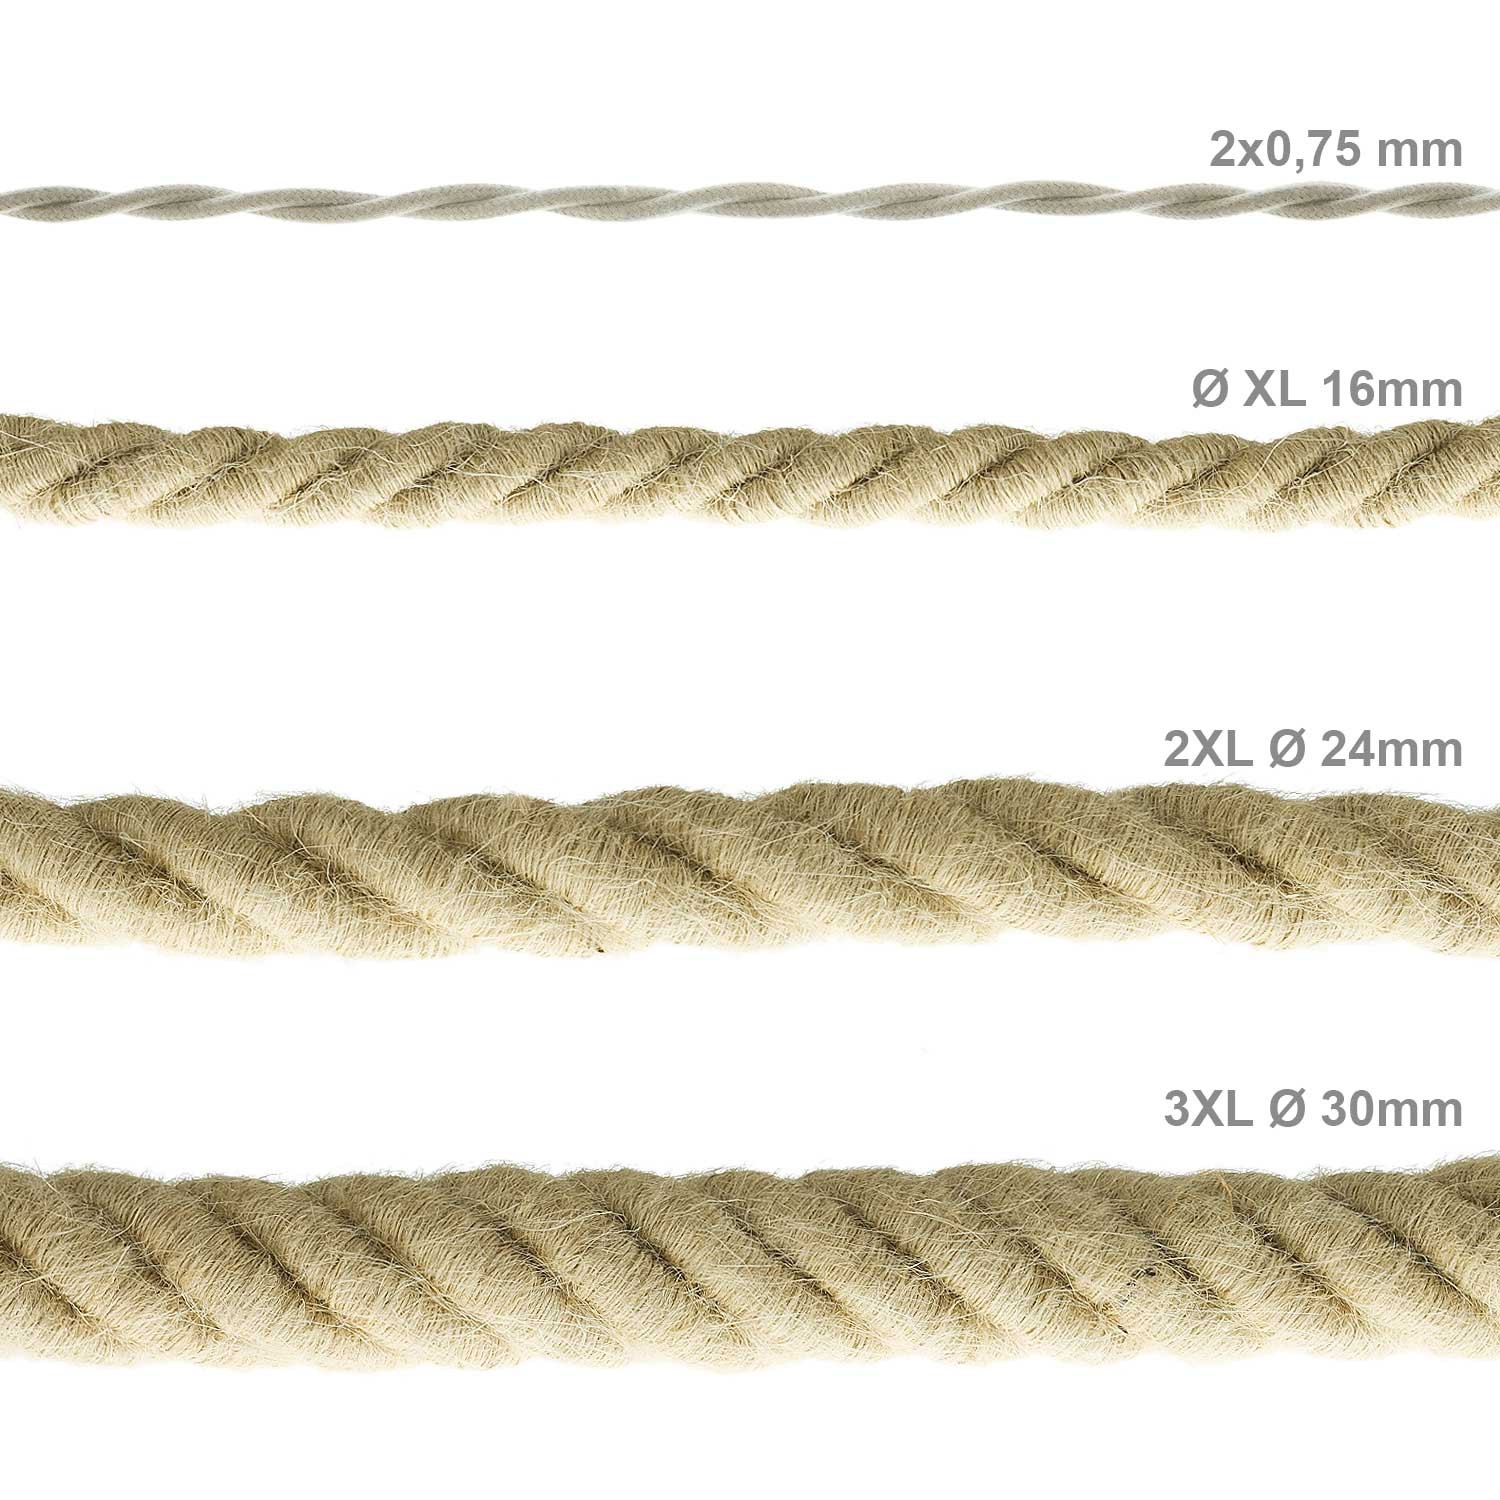 3XL Rope electrical wire 18/3 AWG wire inside. Rough Jute Fabric. 30mm.